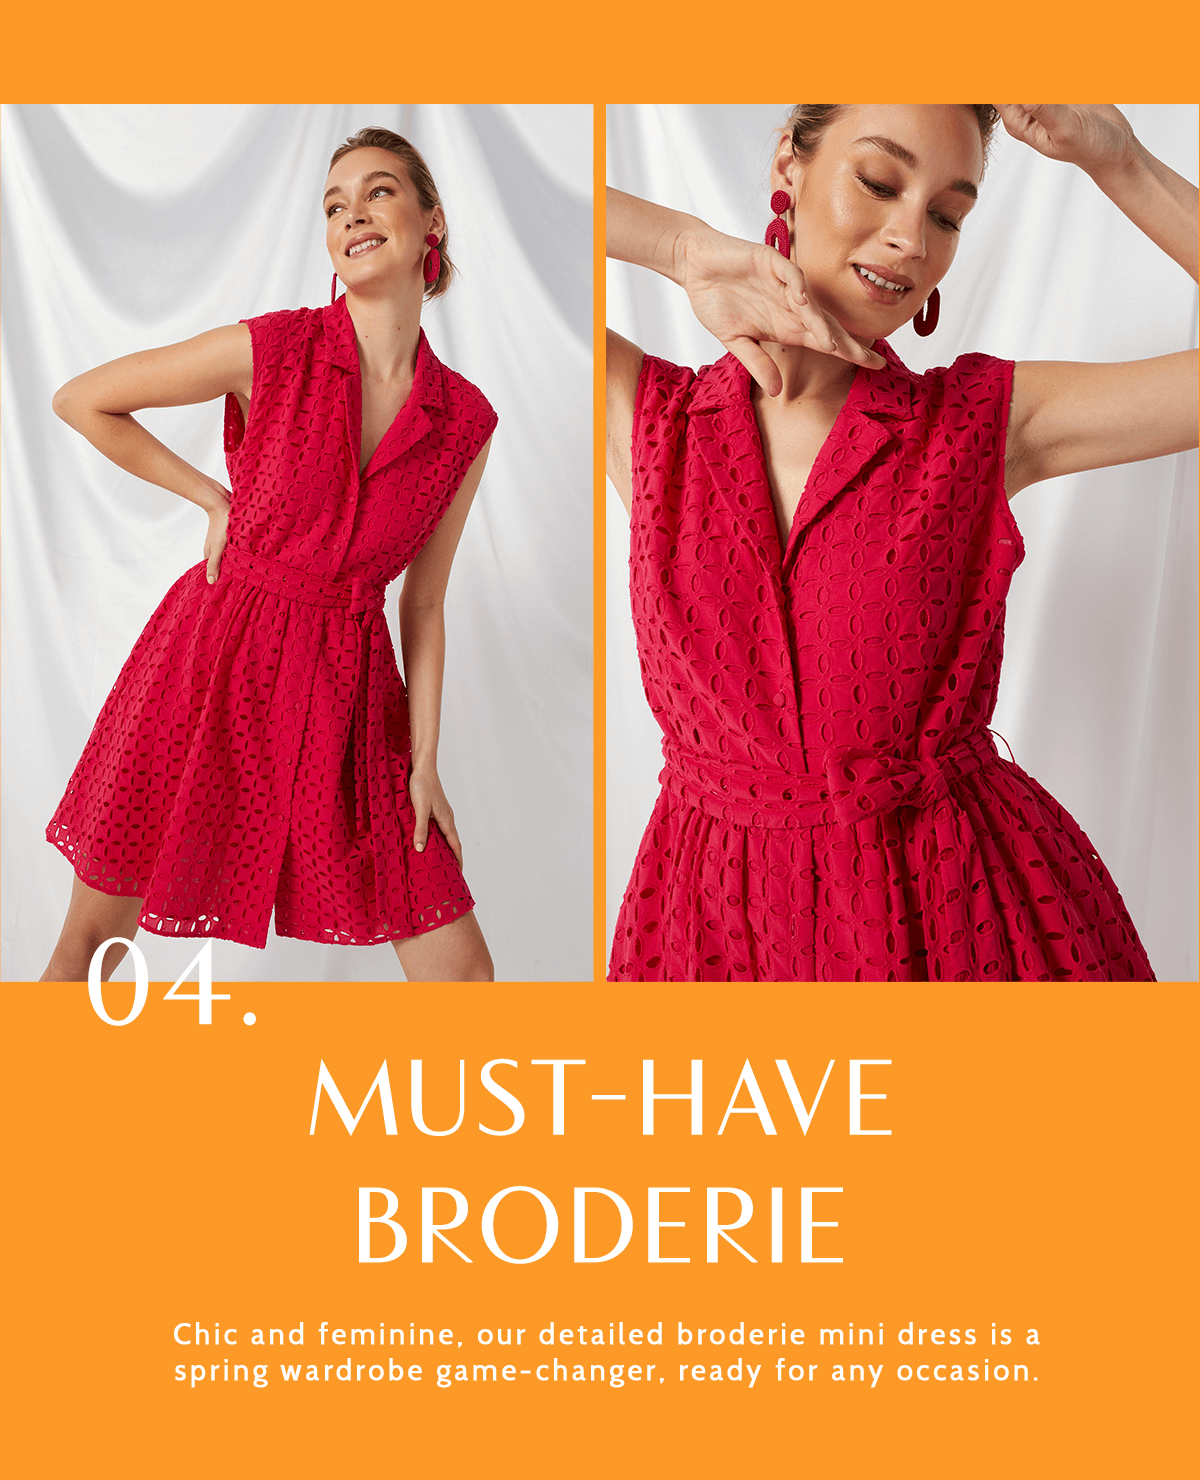 MUST-HAVE BRODERIE  Chic and feminine, our detailed broderie mini dress is a spring wardrobe game-changer, ready for any occasion.  